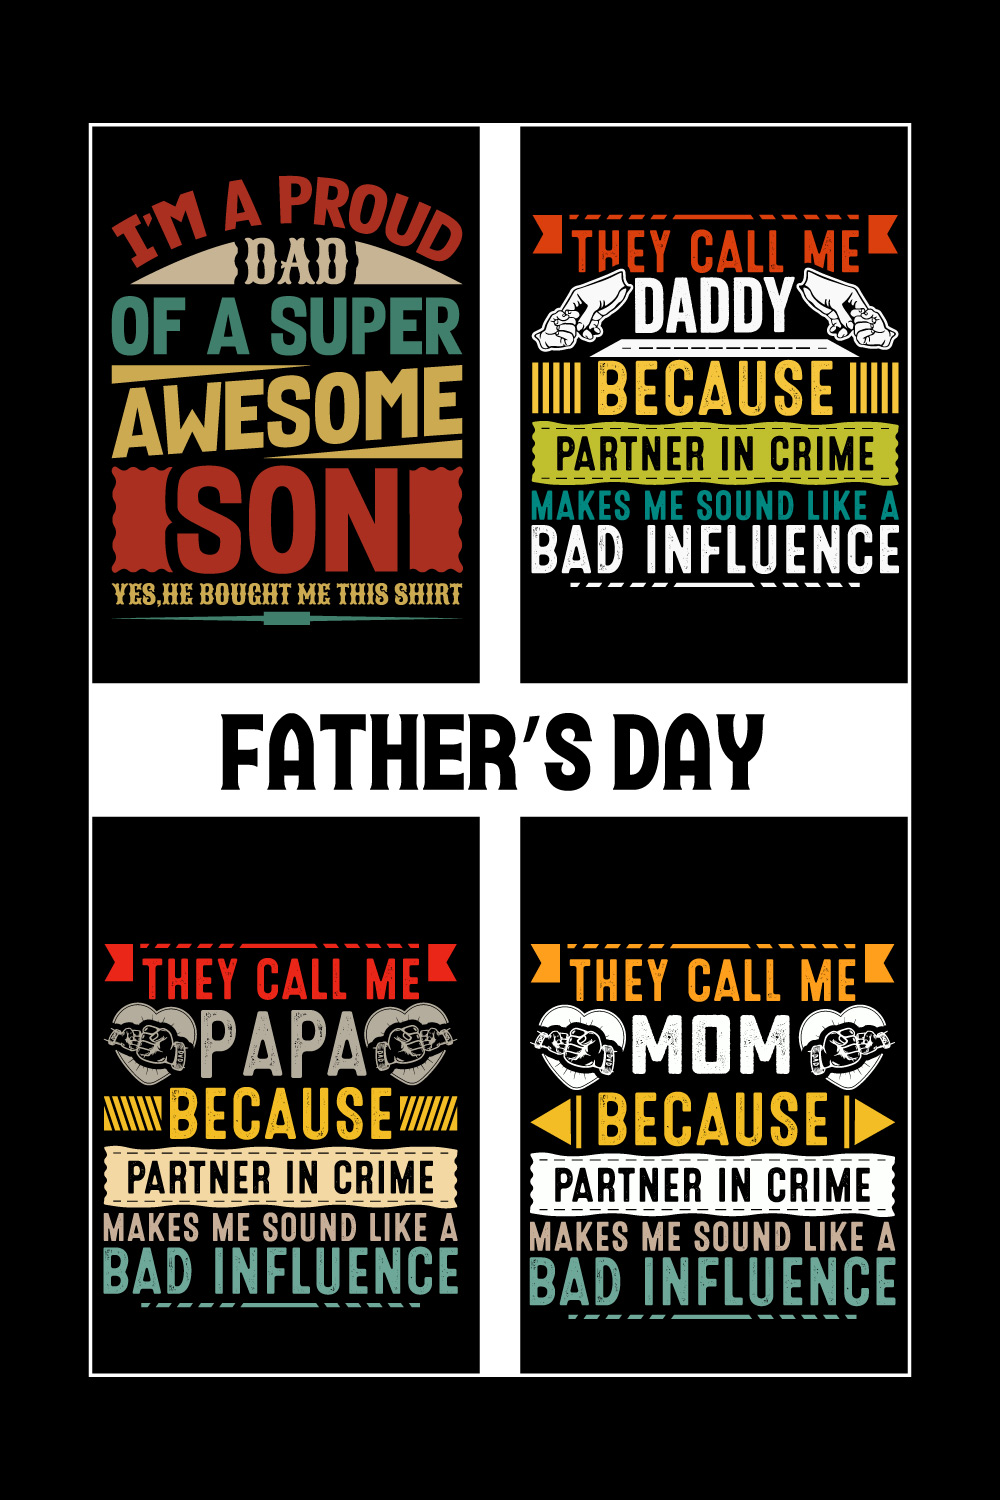 Father's Day T-Shirt- Dad T-Shirt Design- Father Day T-shirt- Happy Father's Day T-shirt design ideas- Dad Day- Papa Son- fathers Day Shirt Ideas for Family- Best Selling T-shirt- Typography T-shirt pinterest preview image.